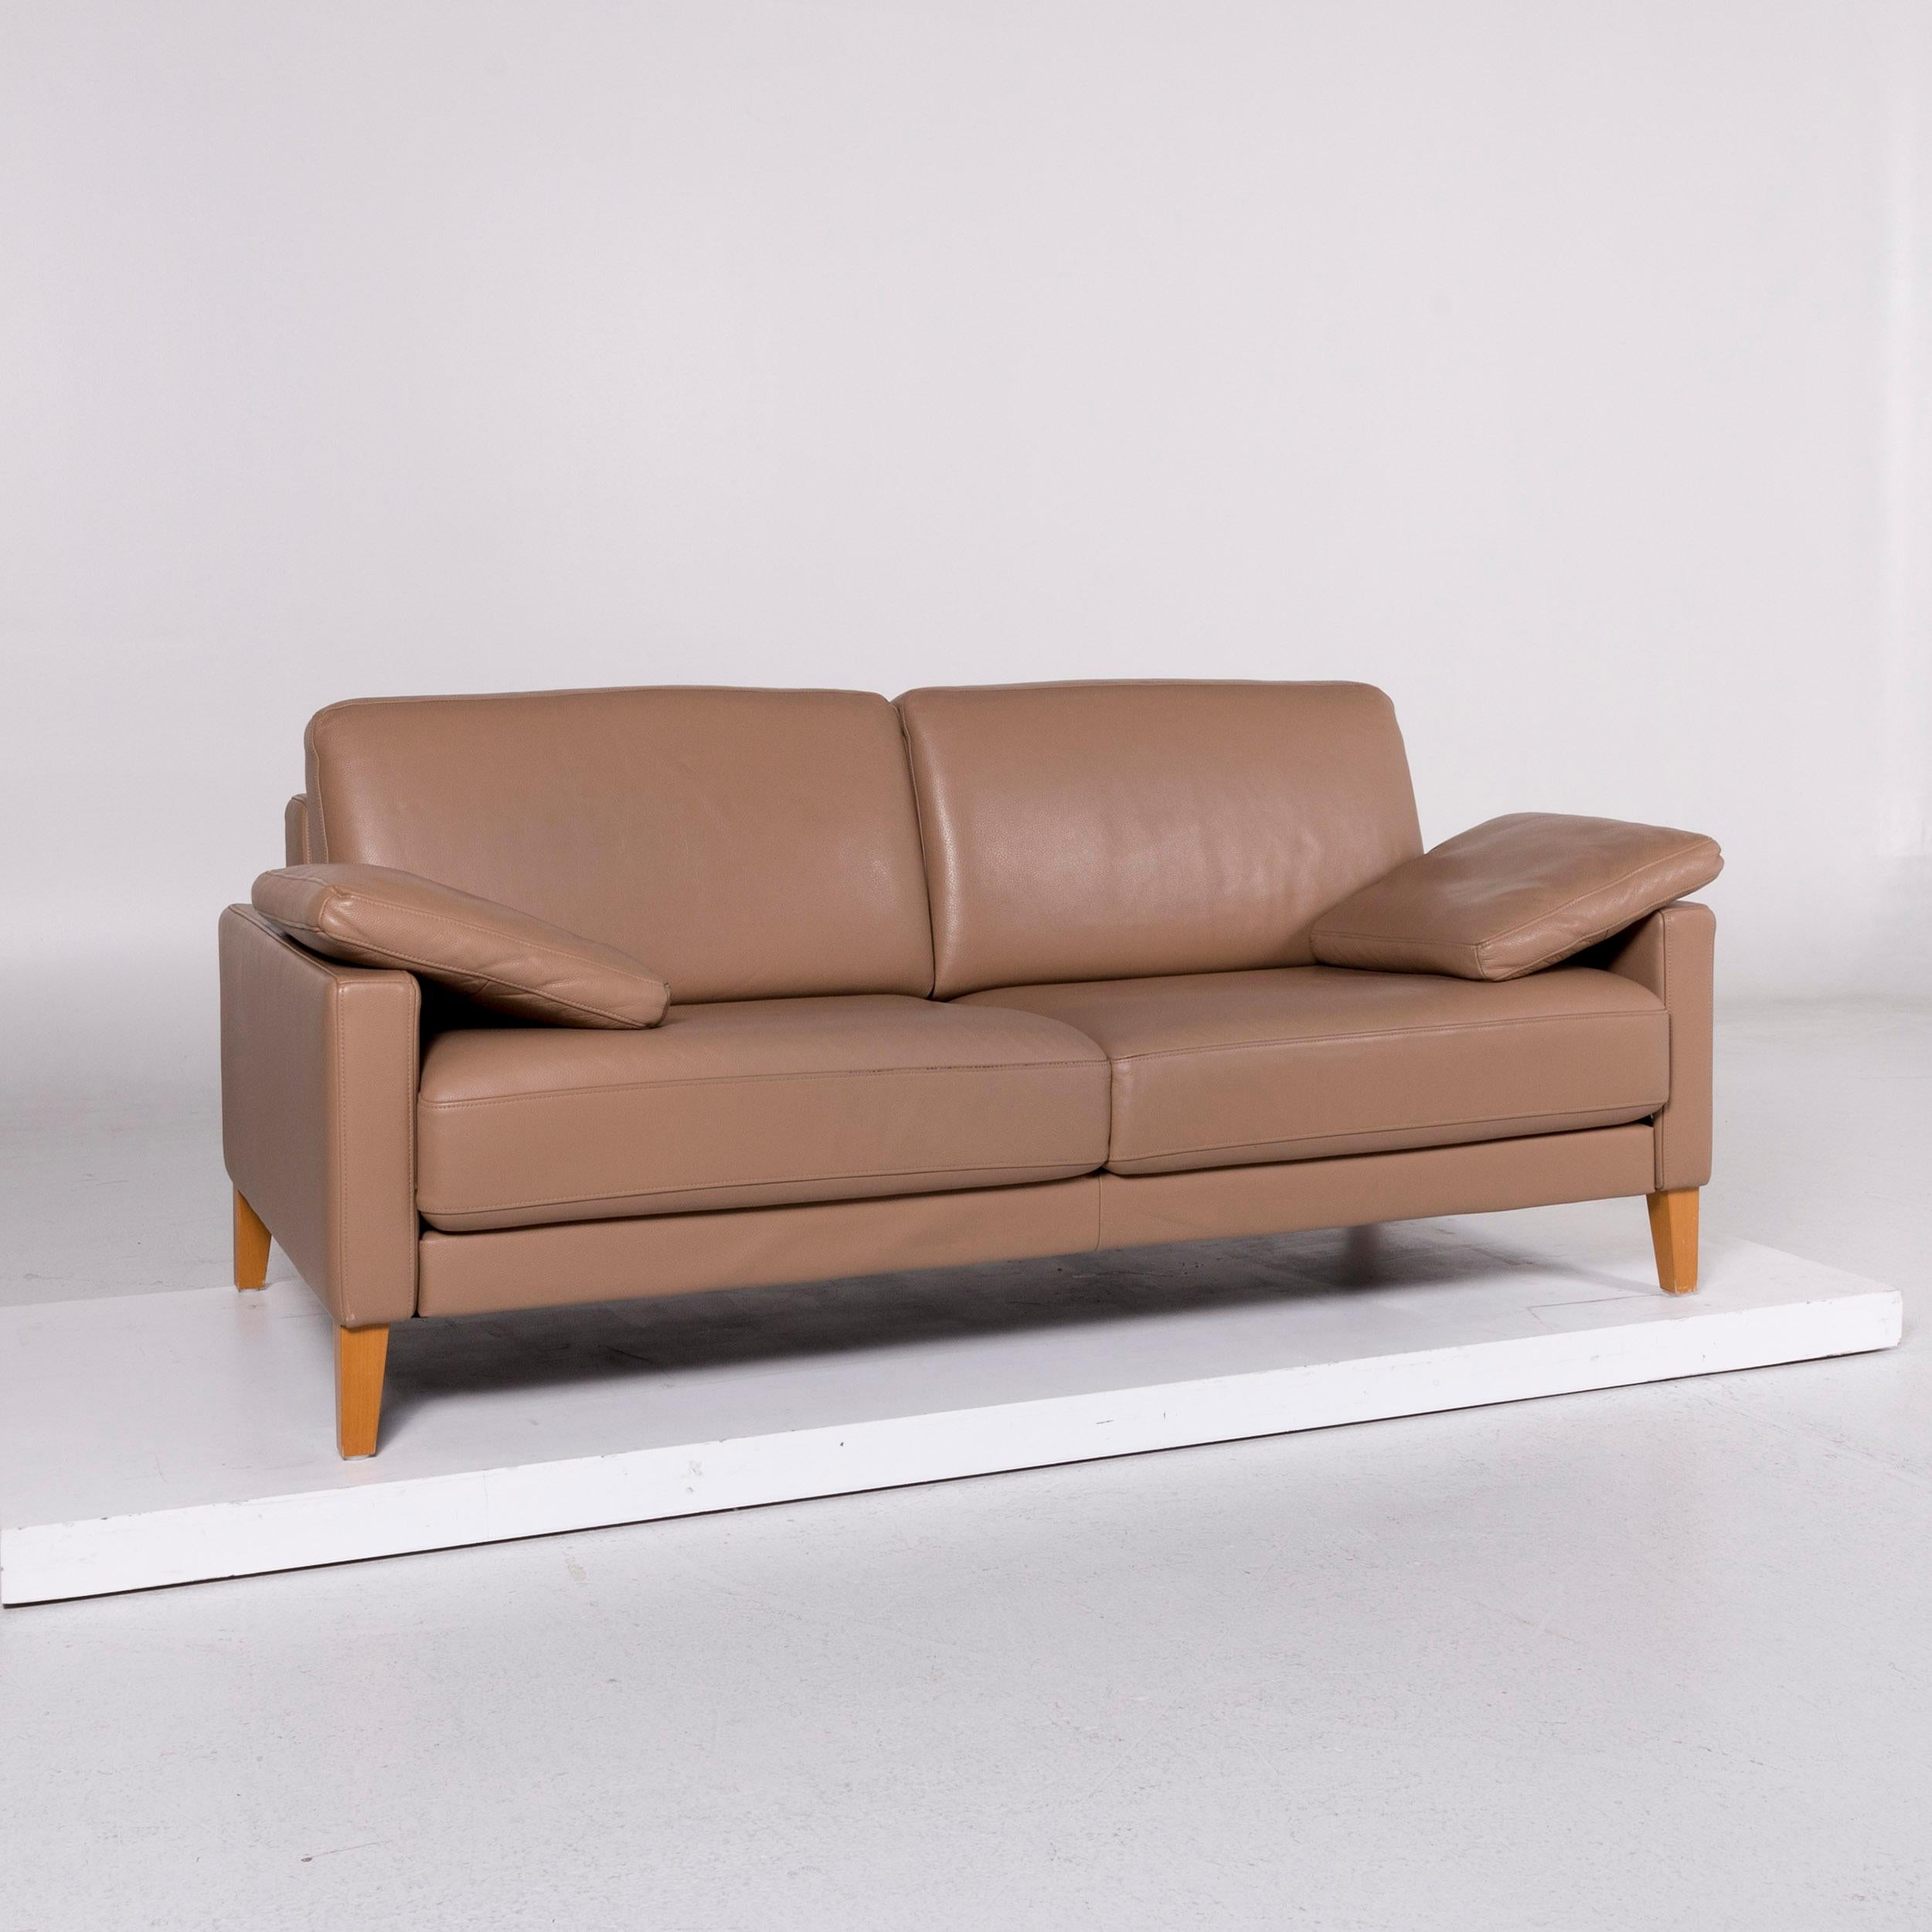 We bring to you a Rolf Benz leather sofa brown two-seat couch.

 Product measurements in centimeters:
 
Depth 97
Width 186
Height 84
Seat-height 45
Rest-height 64
Seat-depth 58
Seat-width 167
Back-height 58.
          